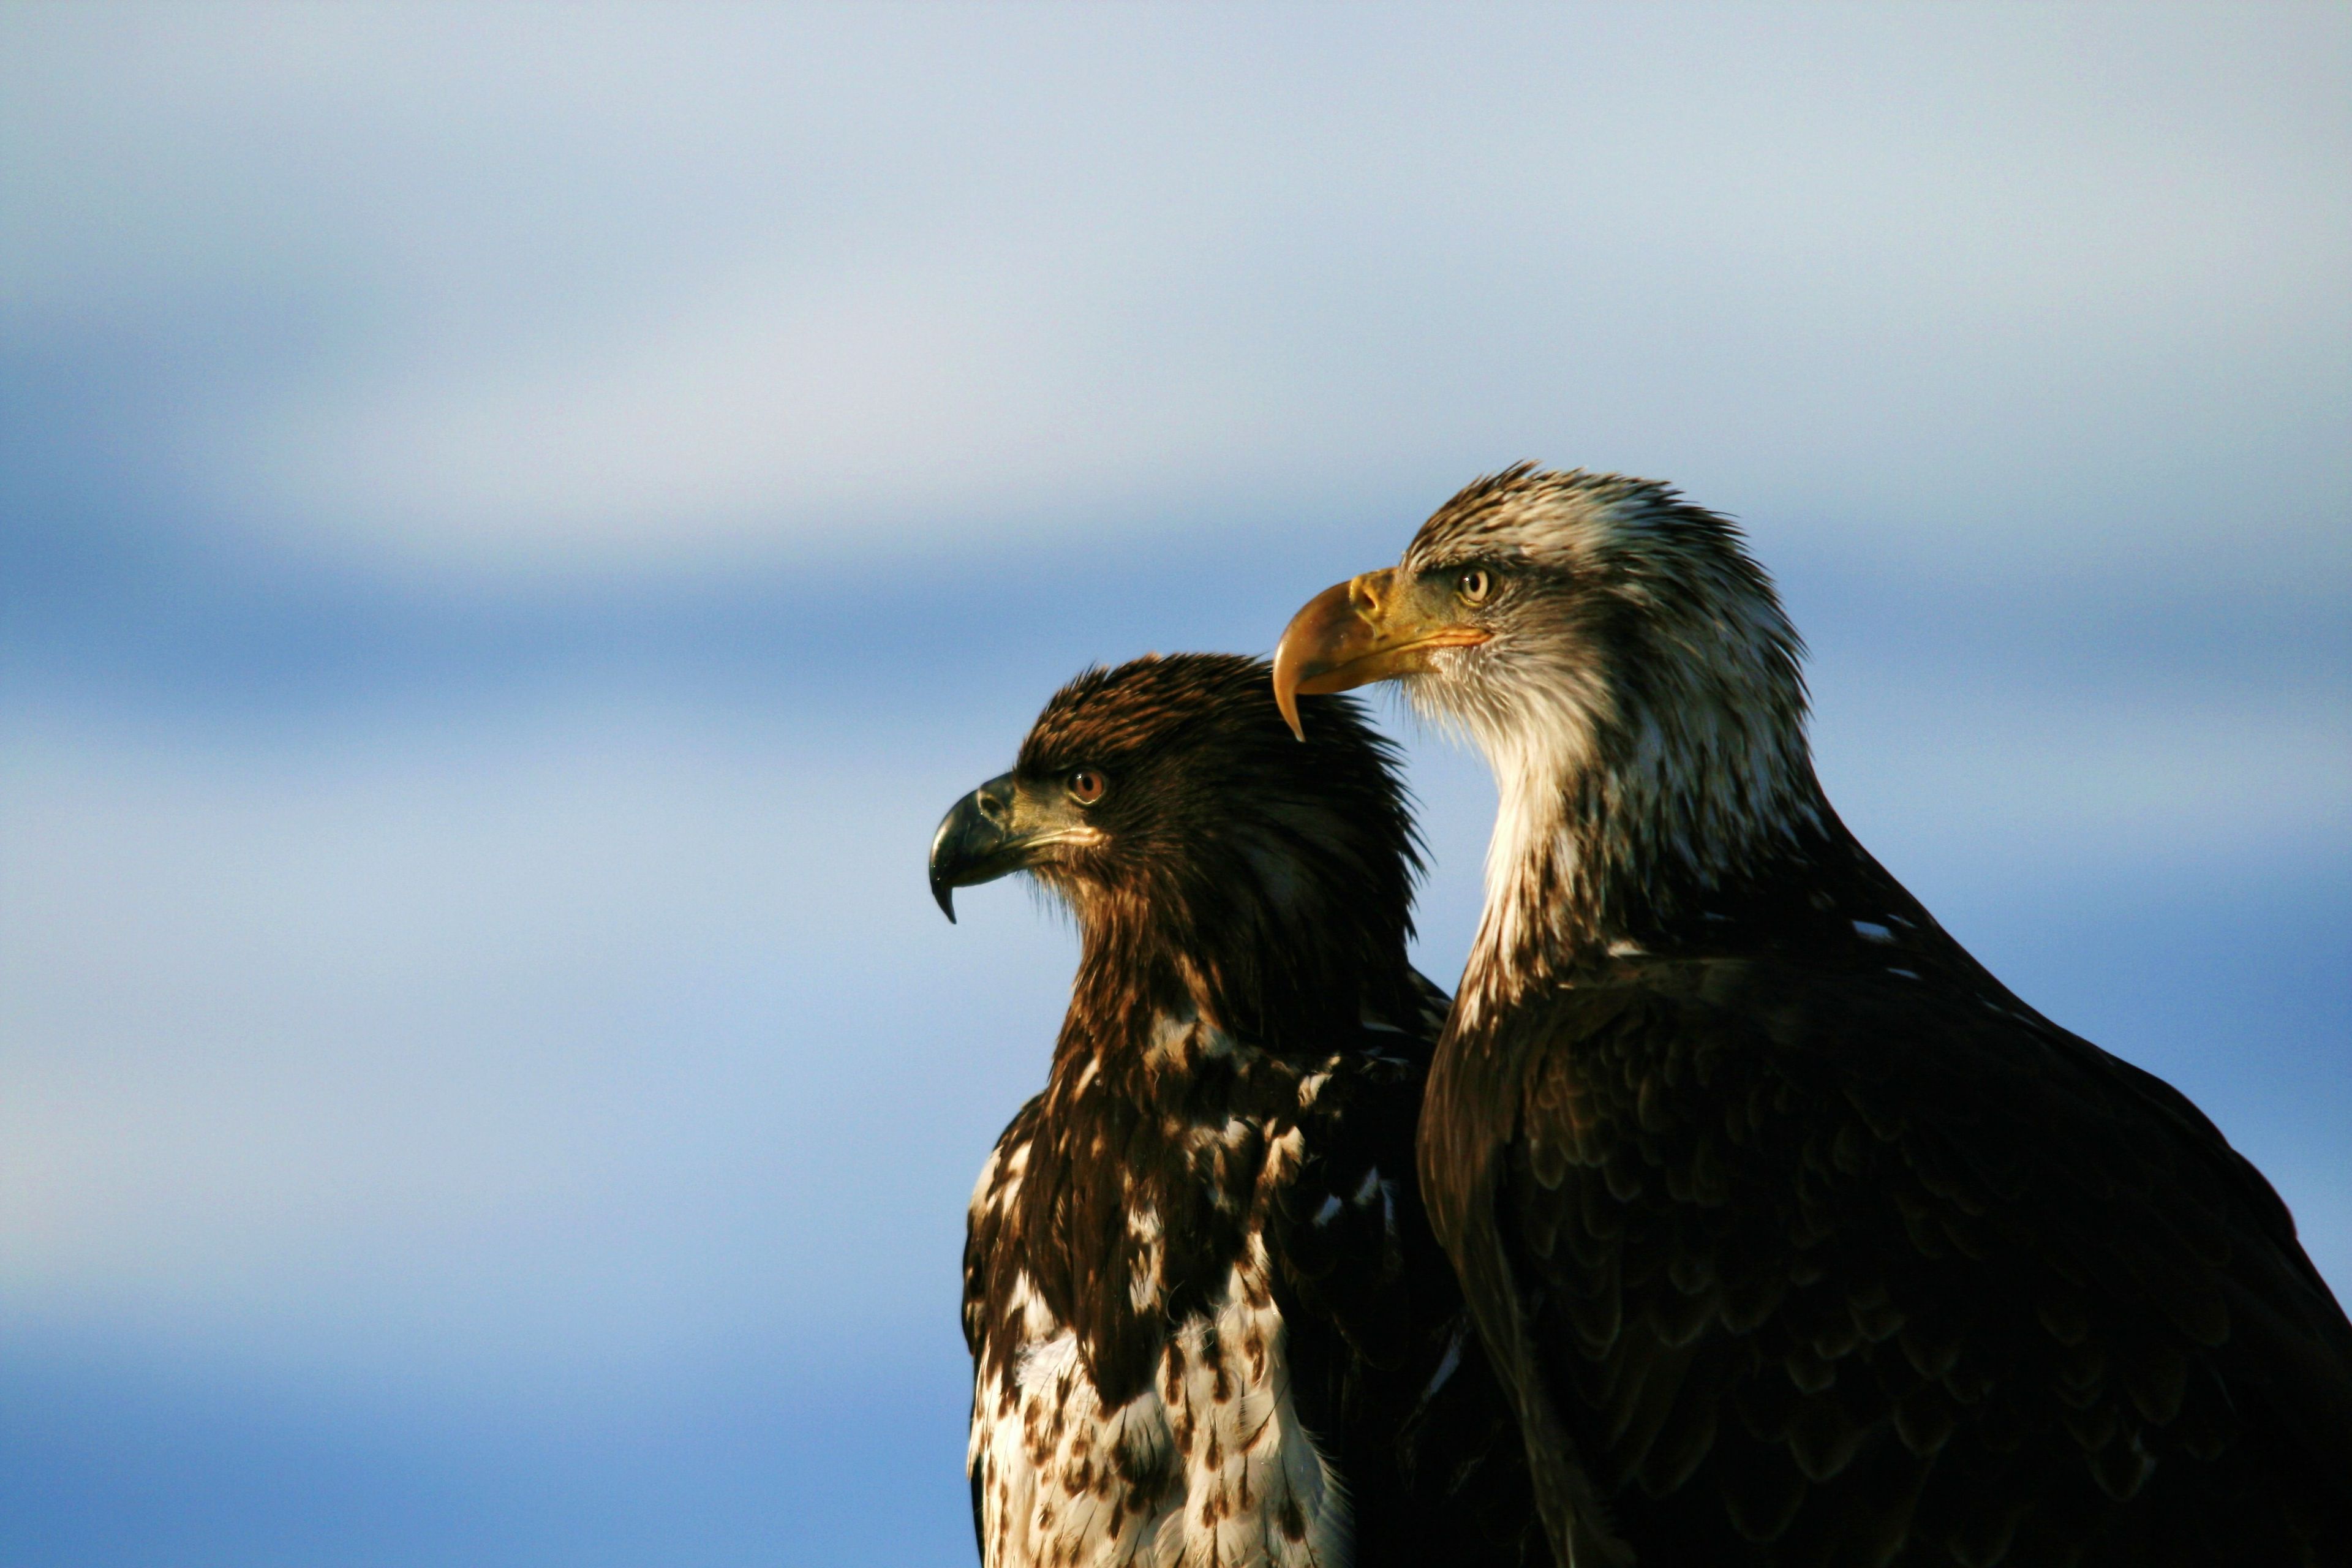 An image of two bald eagles perched, side by side.